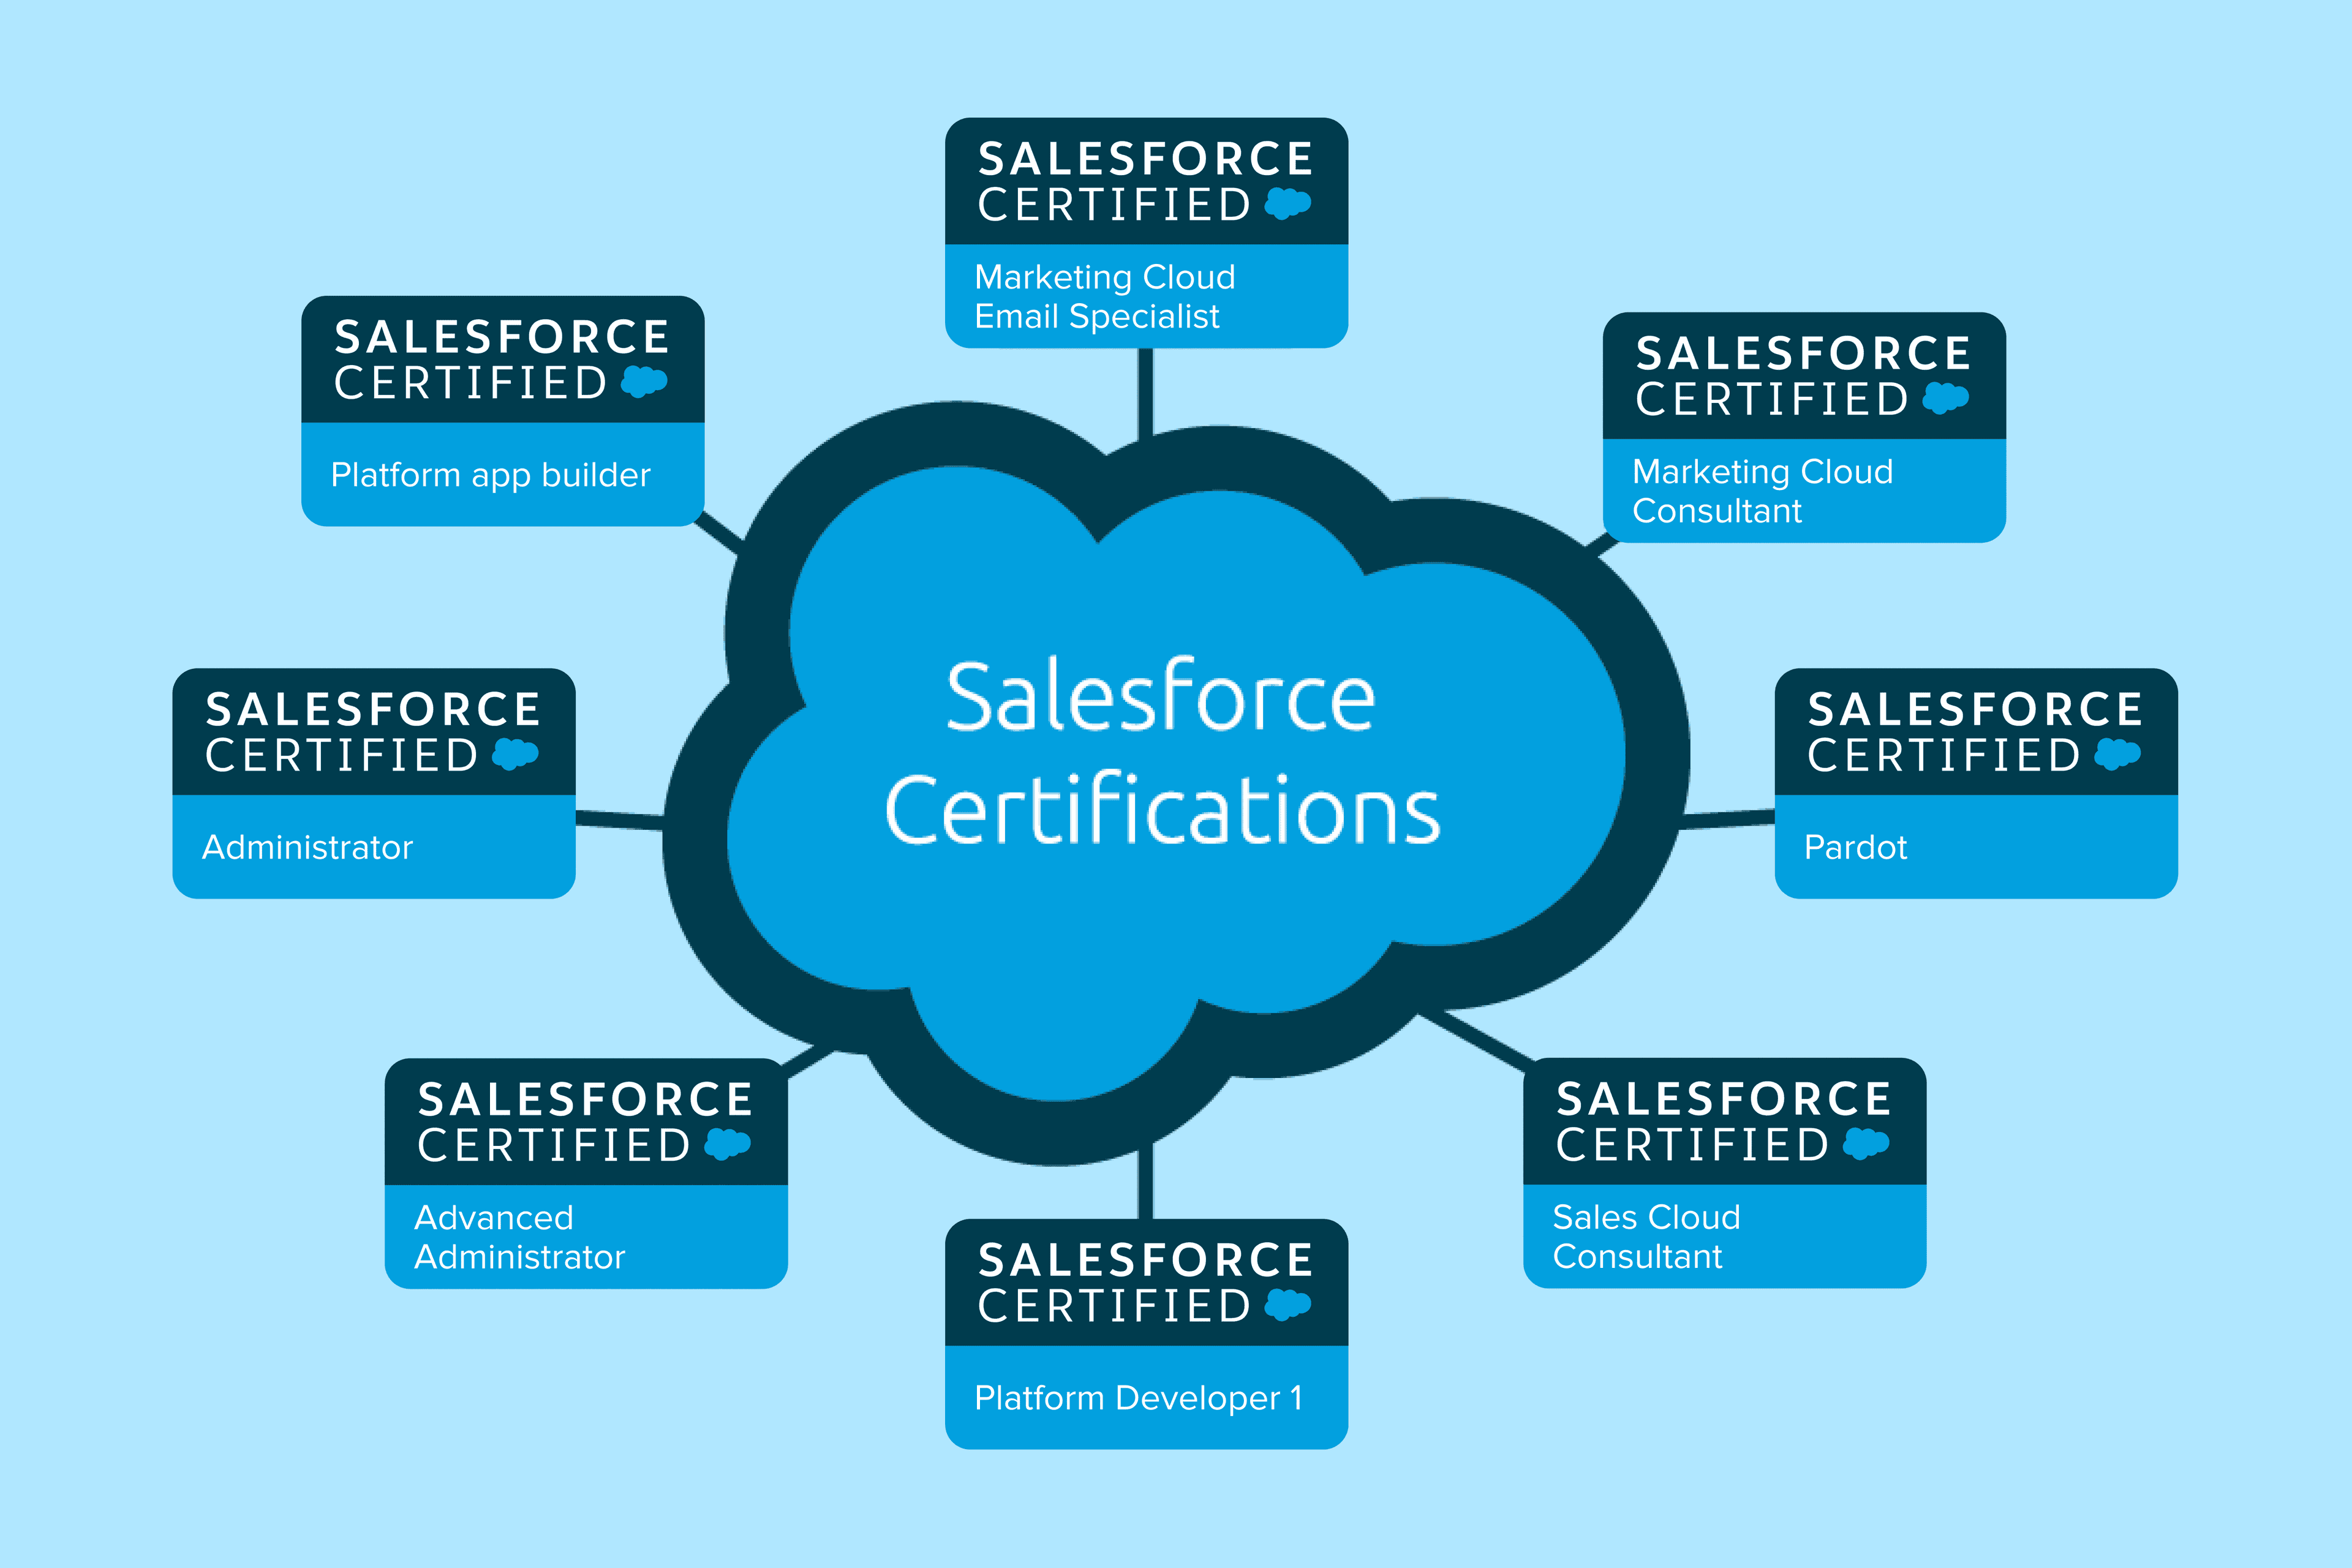 Professional Opinions on Salesforce Certification: Is it Worth it?